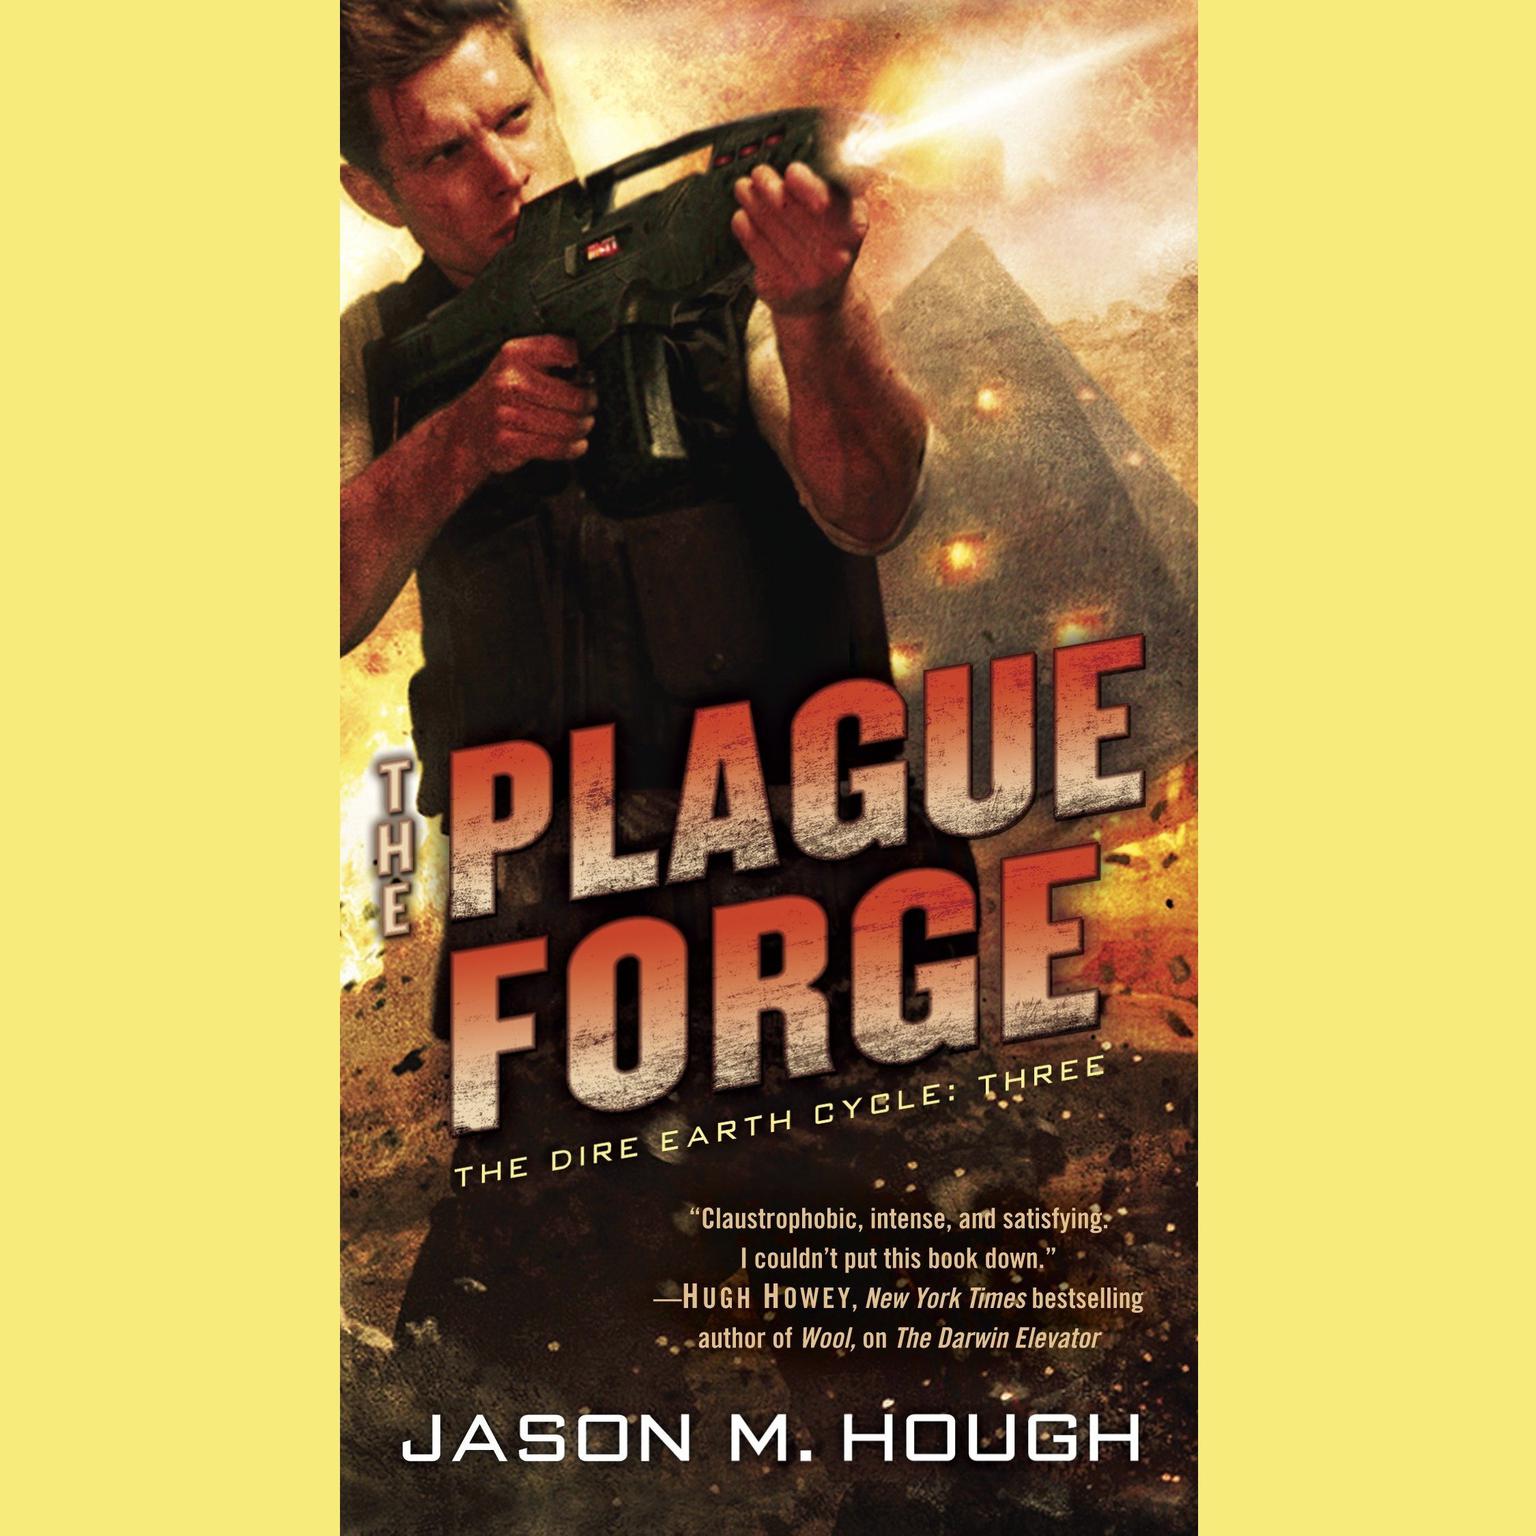 The Plague Forge: The Dire Earth Cycle: Three Audiobook, by Jason M. Hough